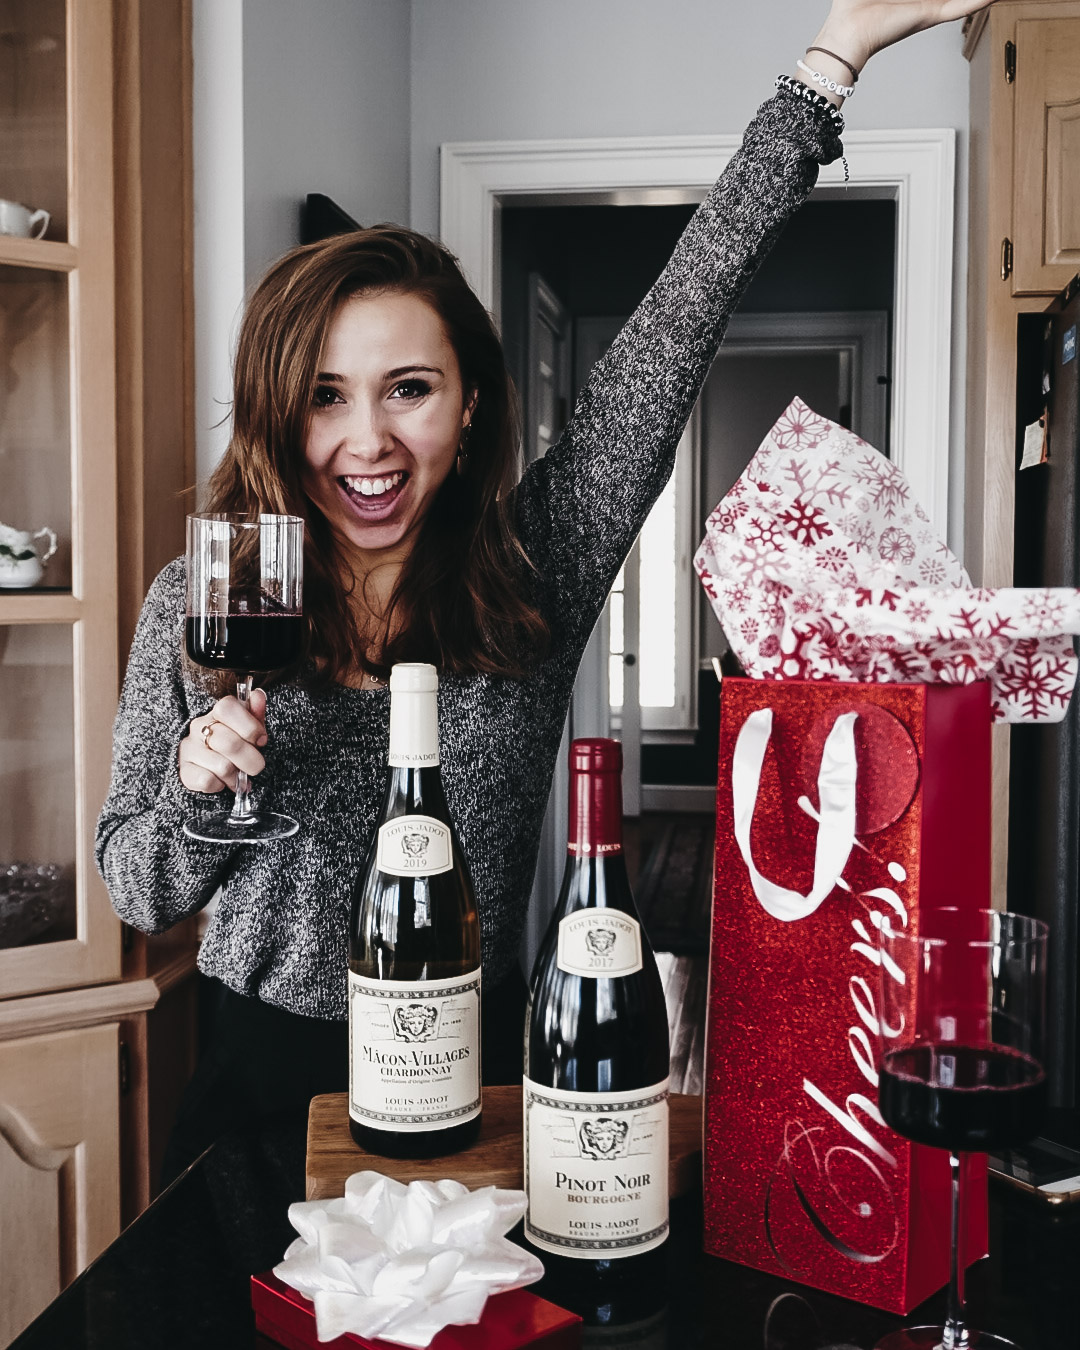 Paige holding wine and standing next to Holiday Wine Gifts for Winelovers in gift bags and boxes